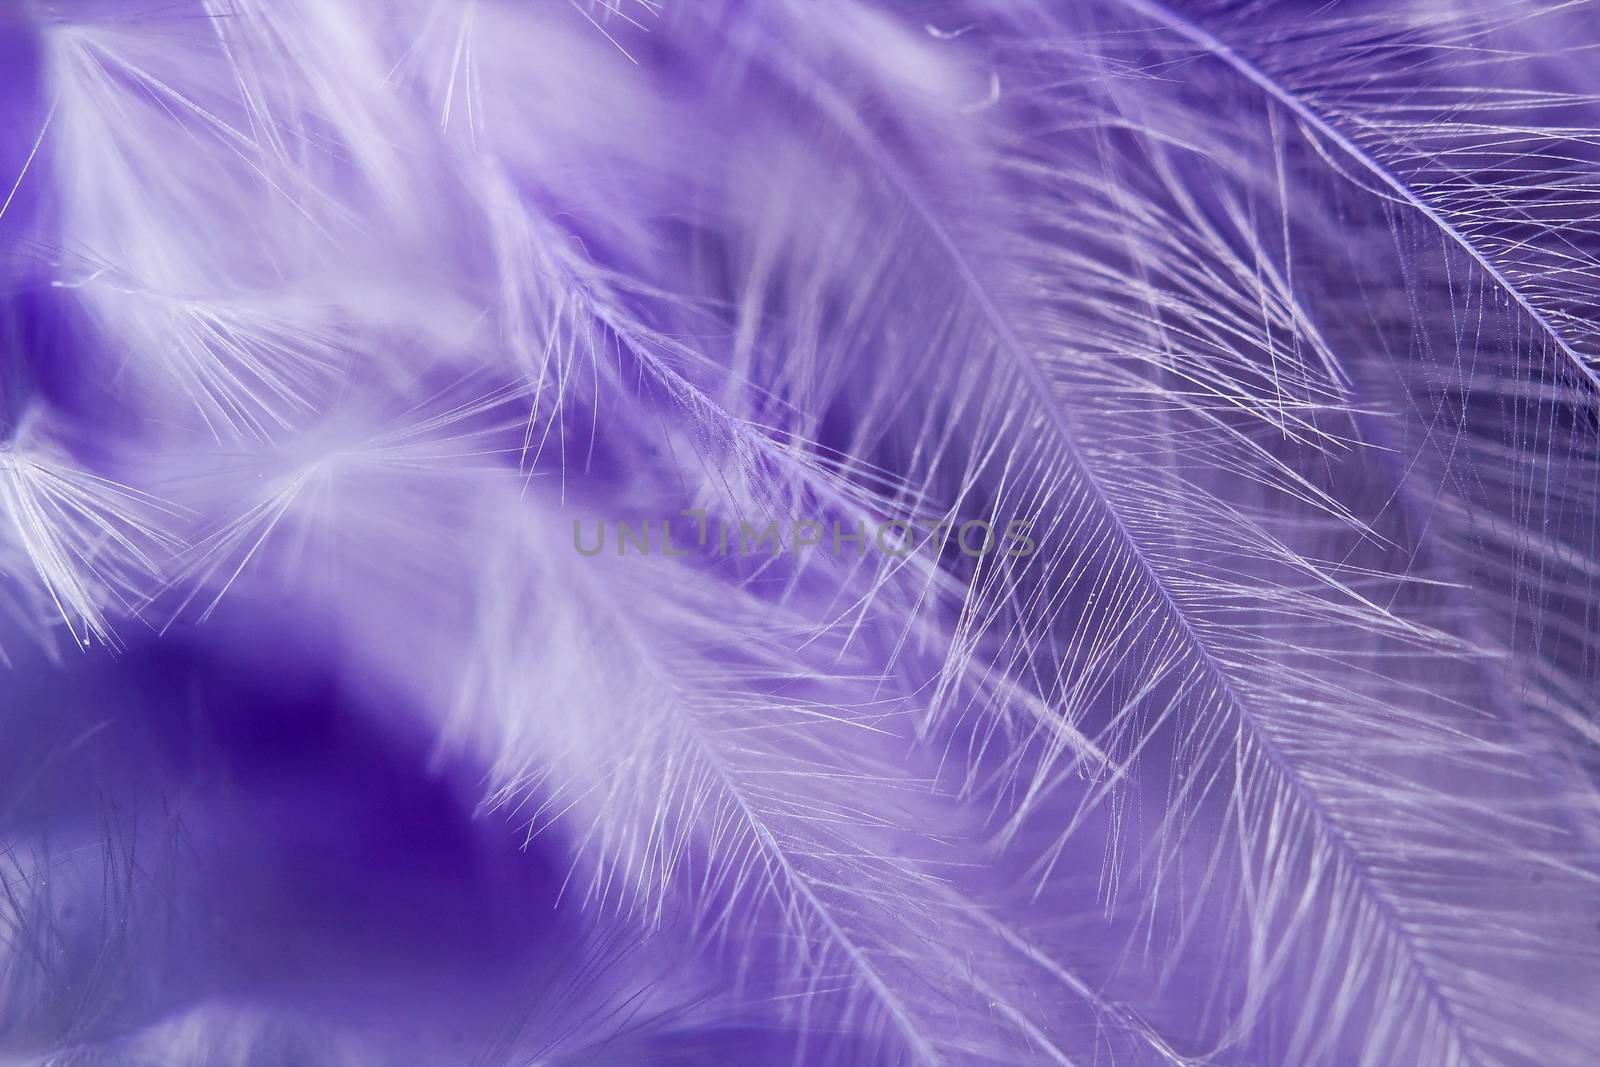 Abstrack colorful background of feathers